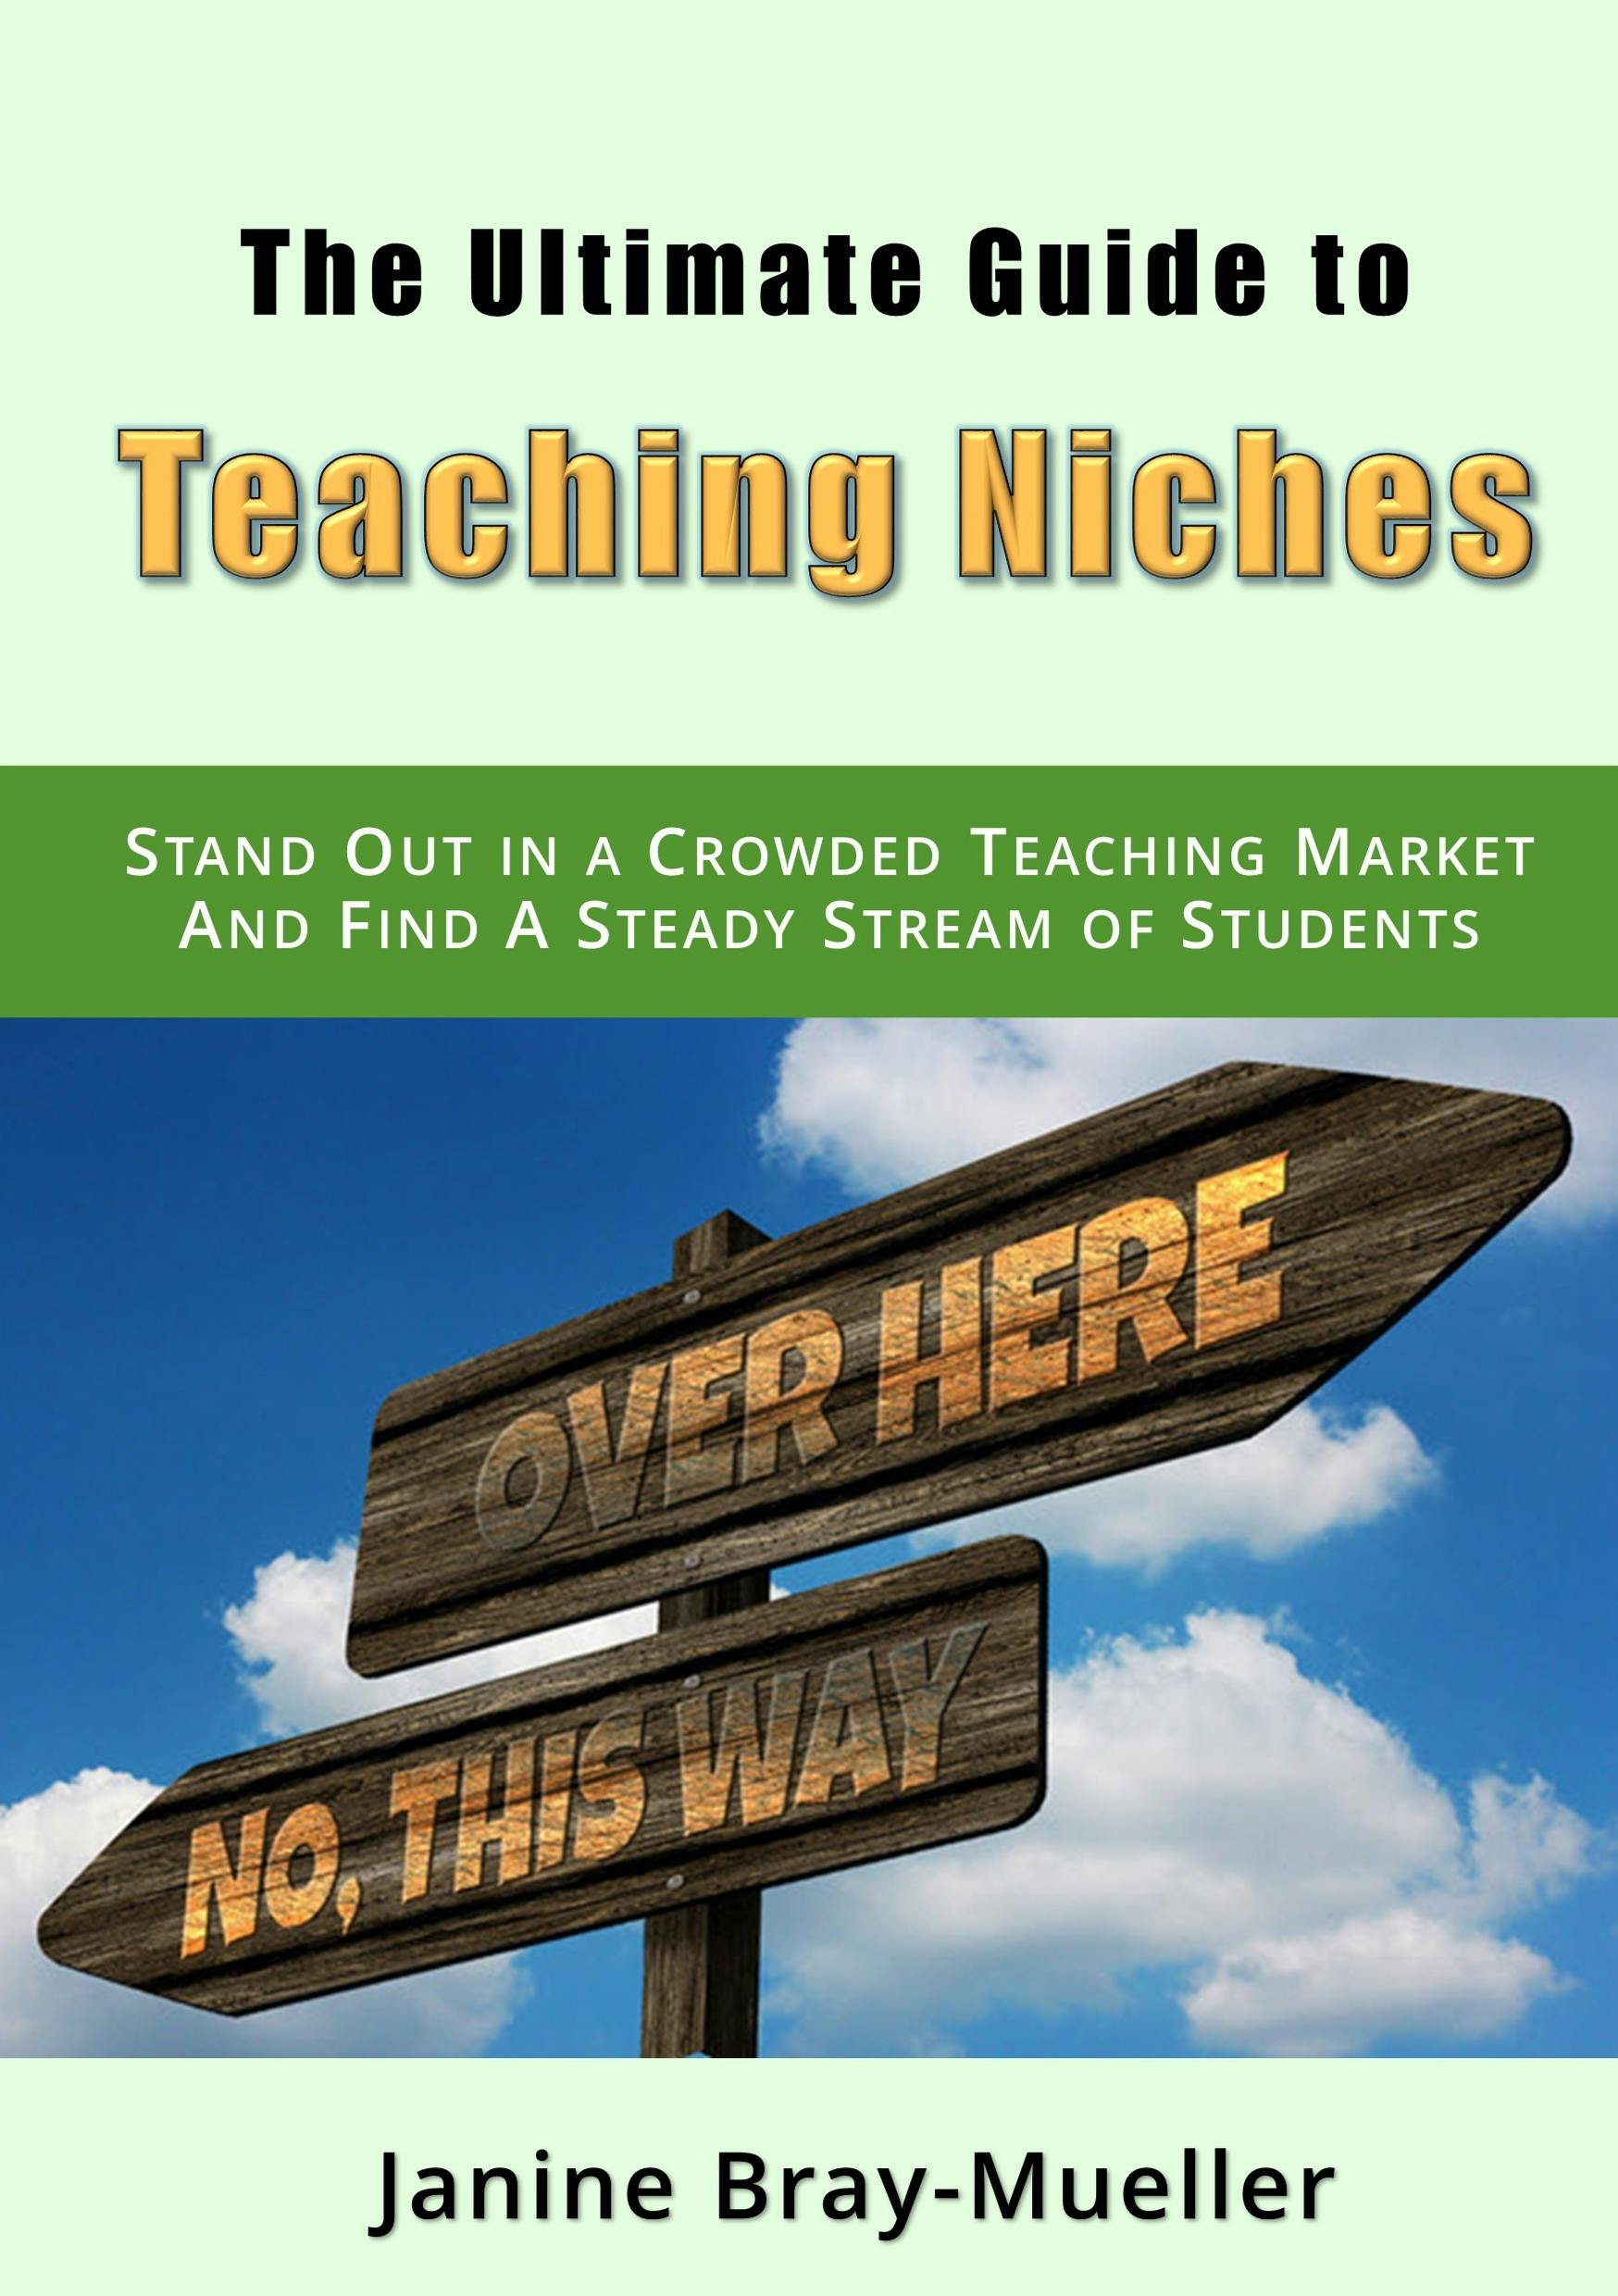 The Ultimate Guide to Teaching Niches - Janine Bray-Mueller